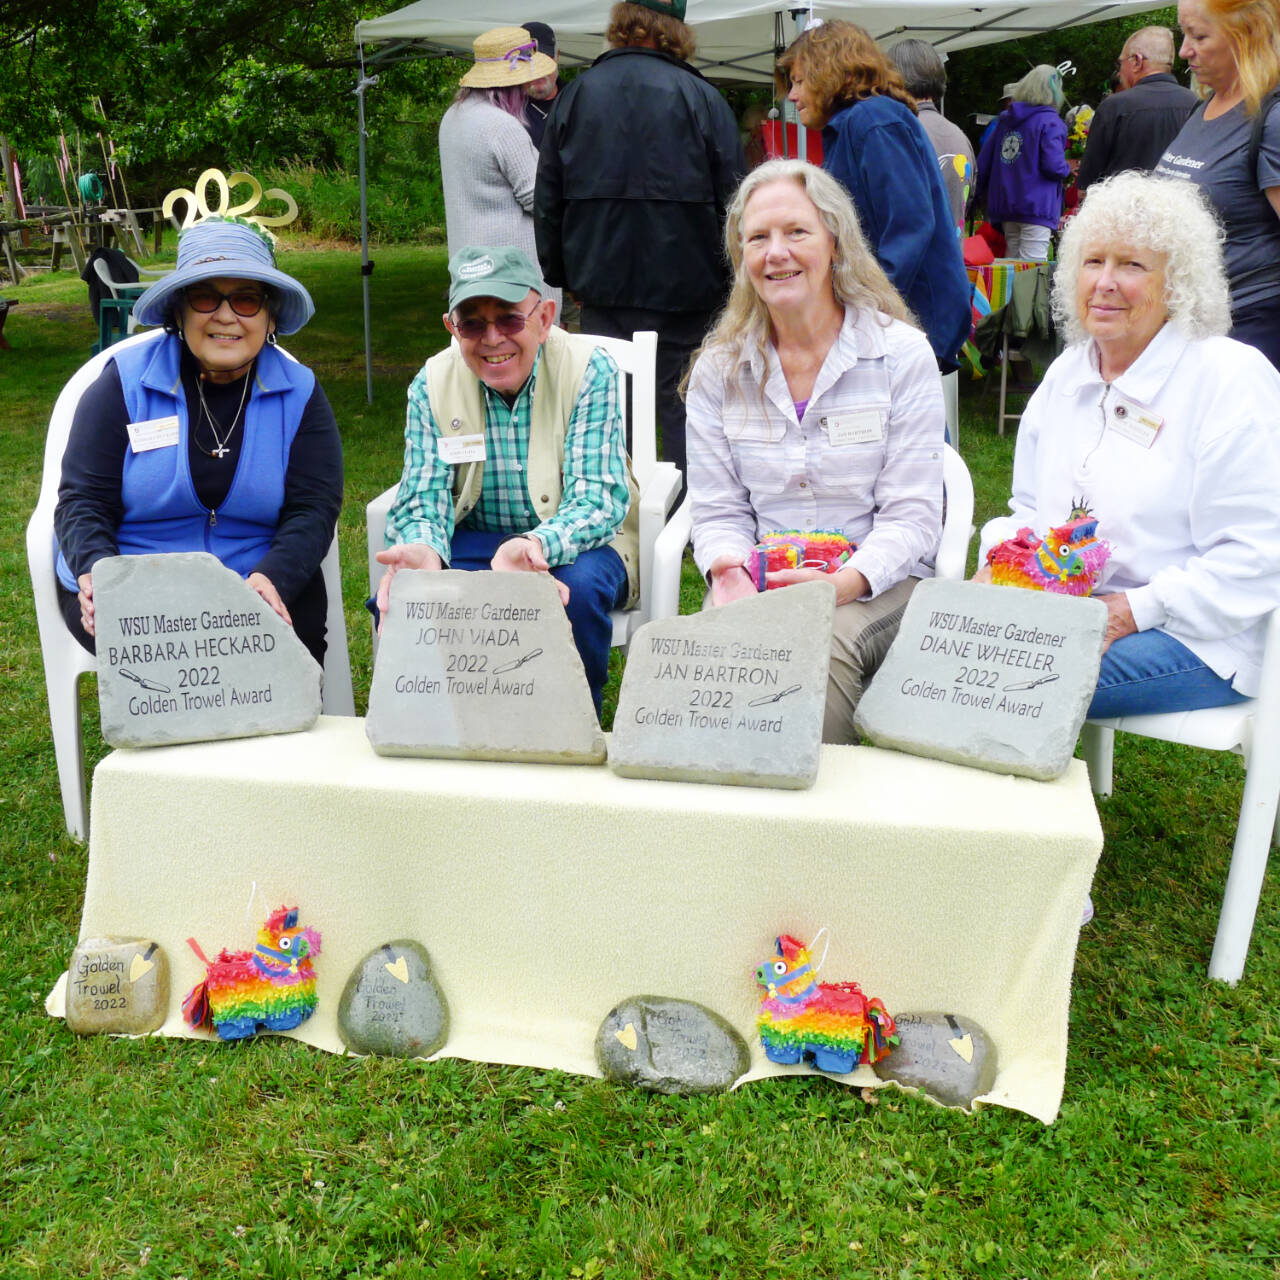 Submitted photo
Clallam County Master Gardeners honor four fellow green thumbs with the 2022 Golden Trowel awards, including (from left) Barbara Heckard, John Viada, Jan Bartron and Diane Wheeler.